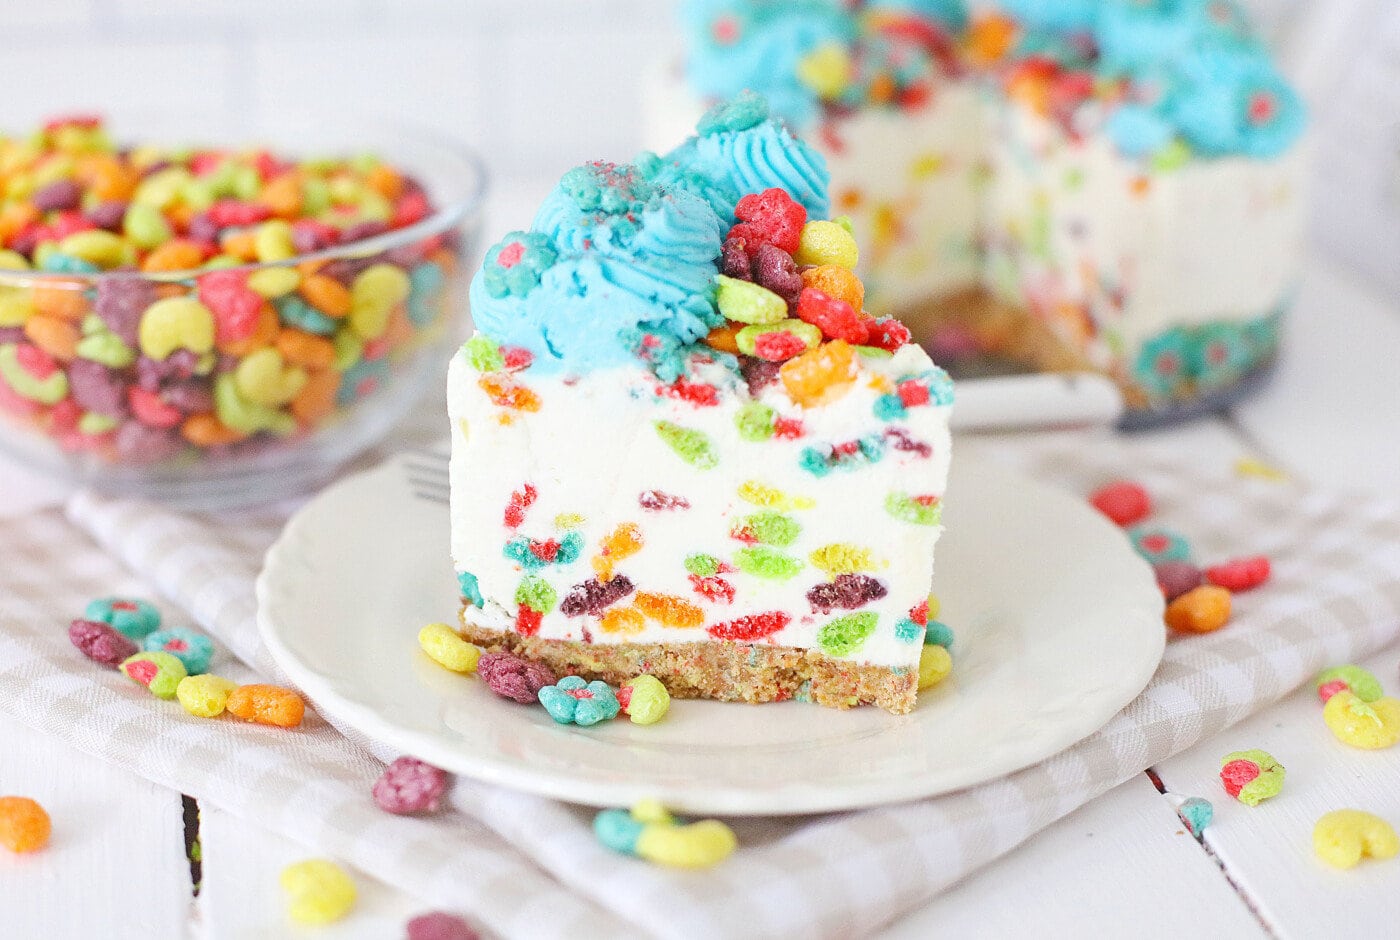 A piece of the Rainbow Trix Cereal Cheesecake on a serving plate.